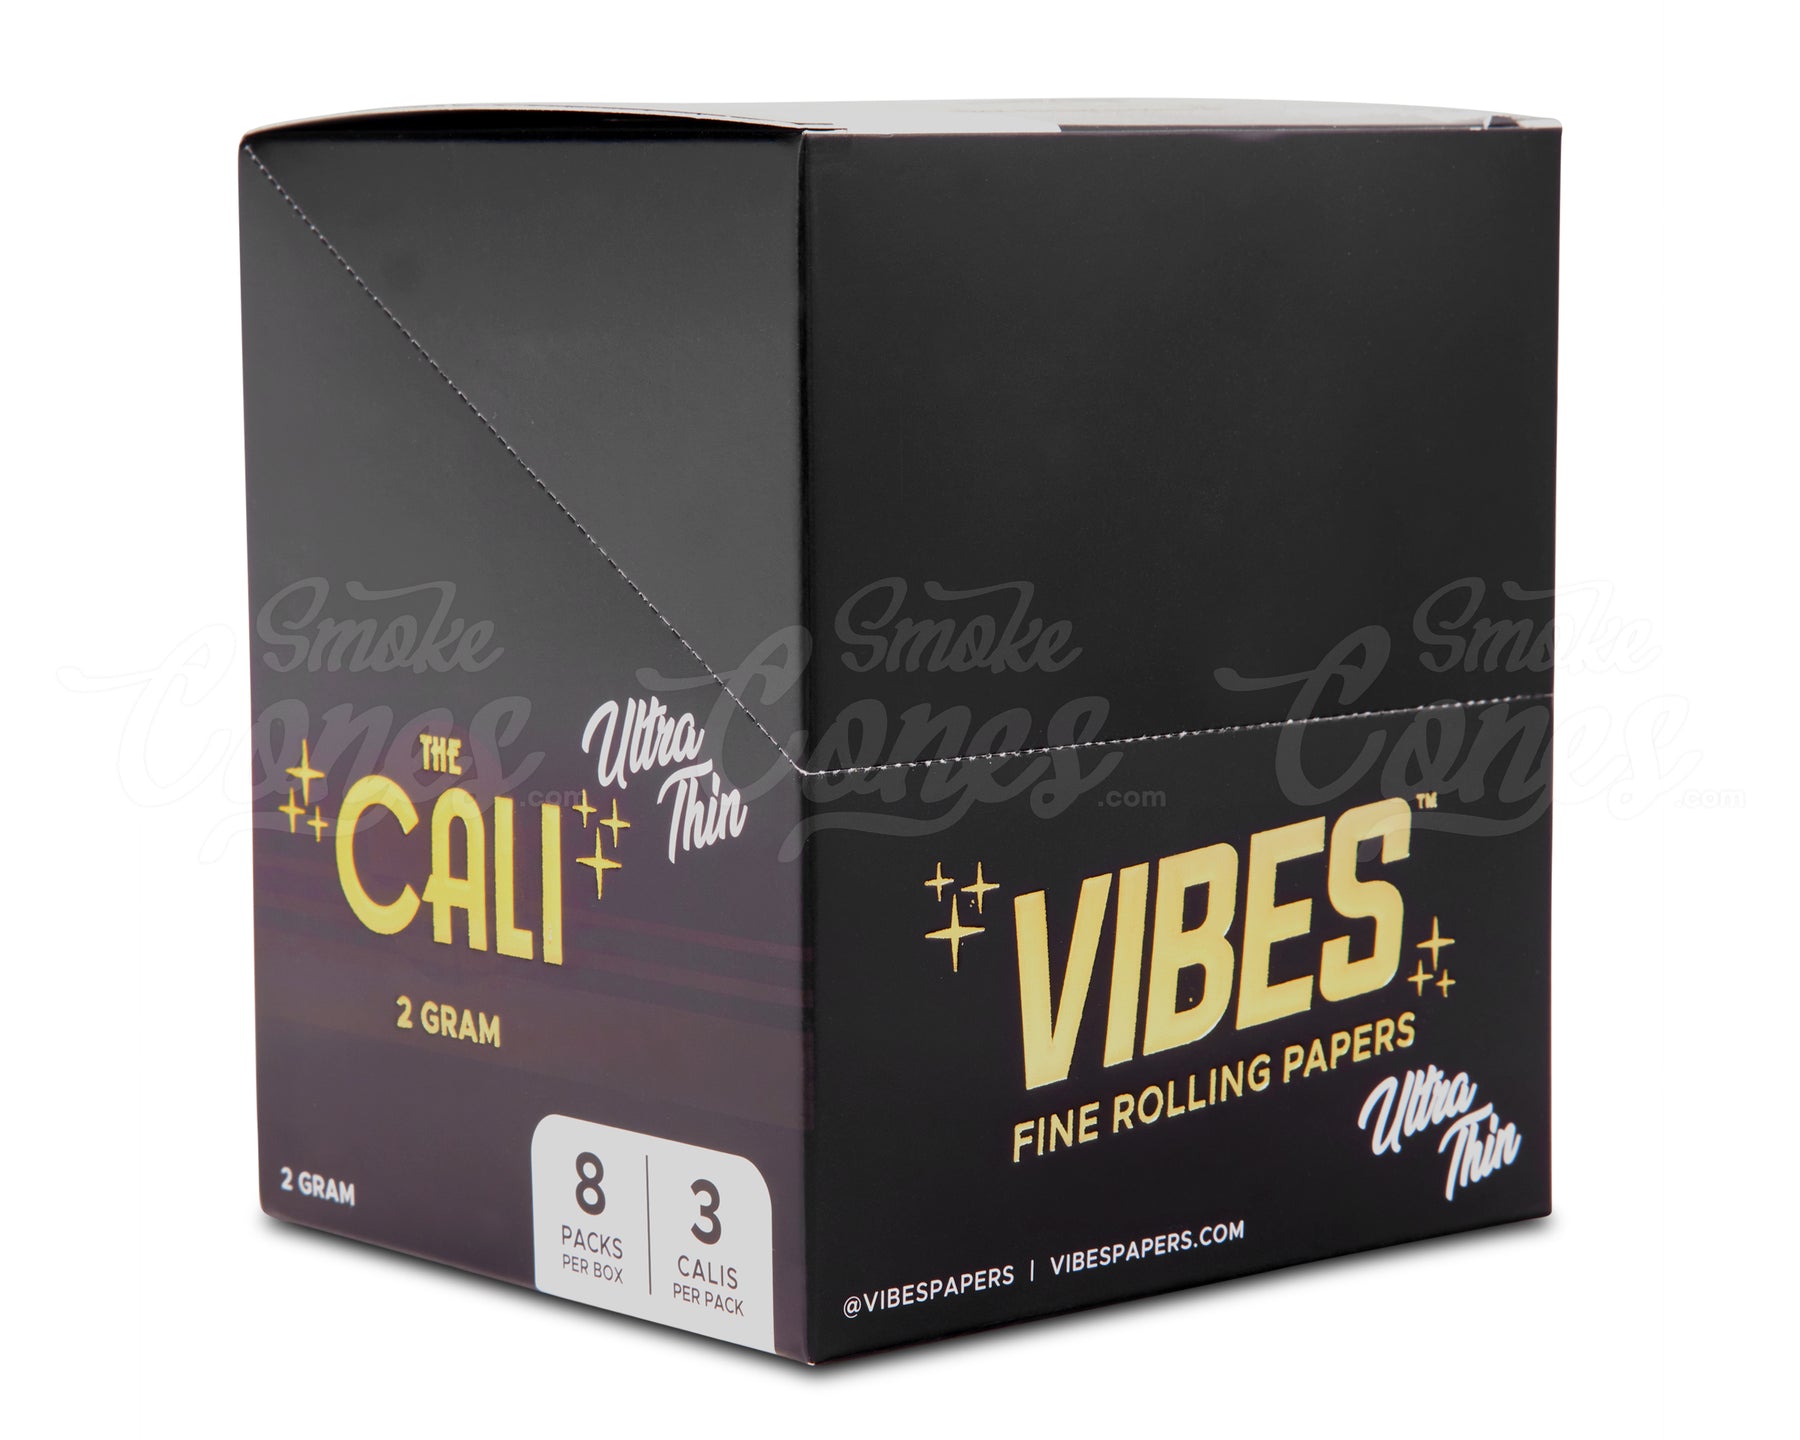 Vibes 110mm King Sized The Cali 2 Gram Pre Rolled Ultra Thin Paper Cones 24/Box